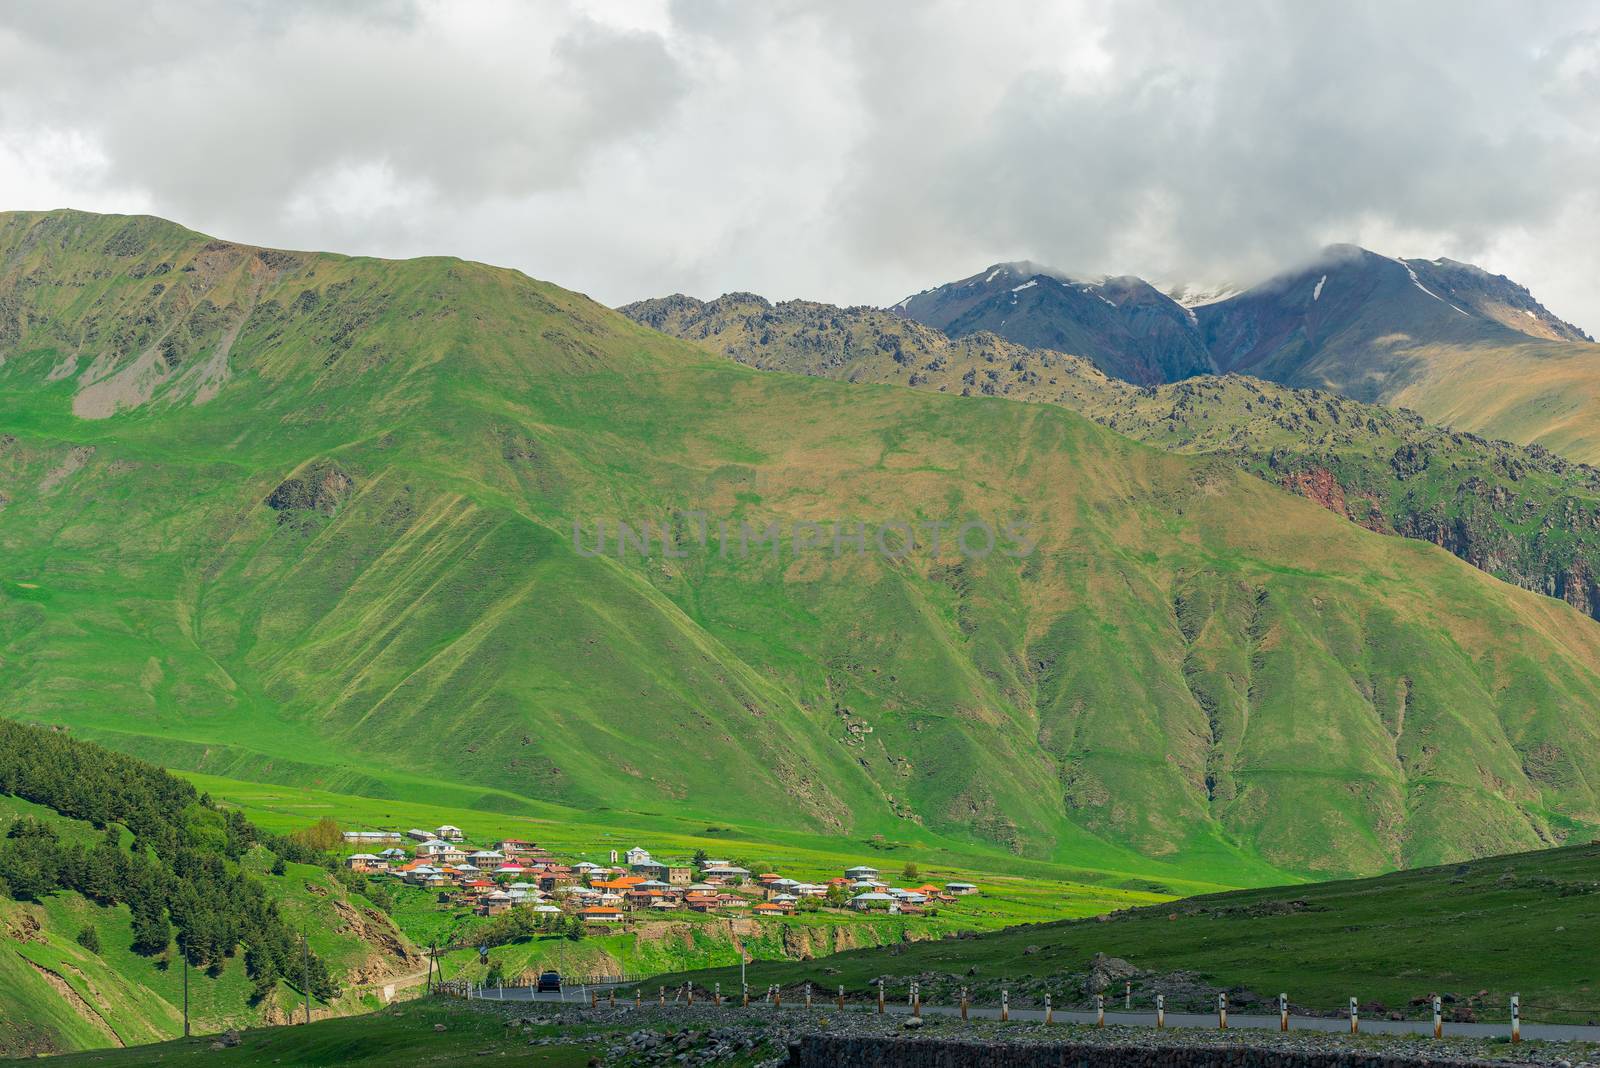 Village in Georgia on a plateau near the high mountains of the C by kosmsos111